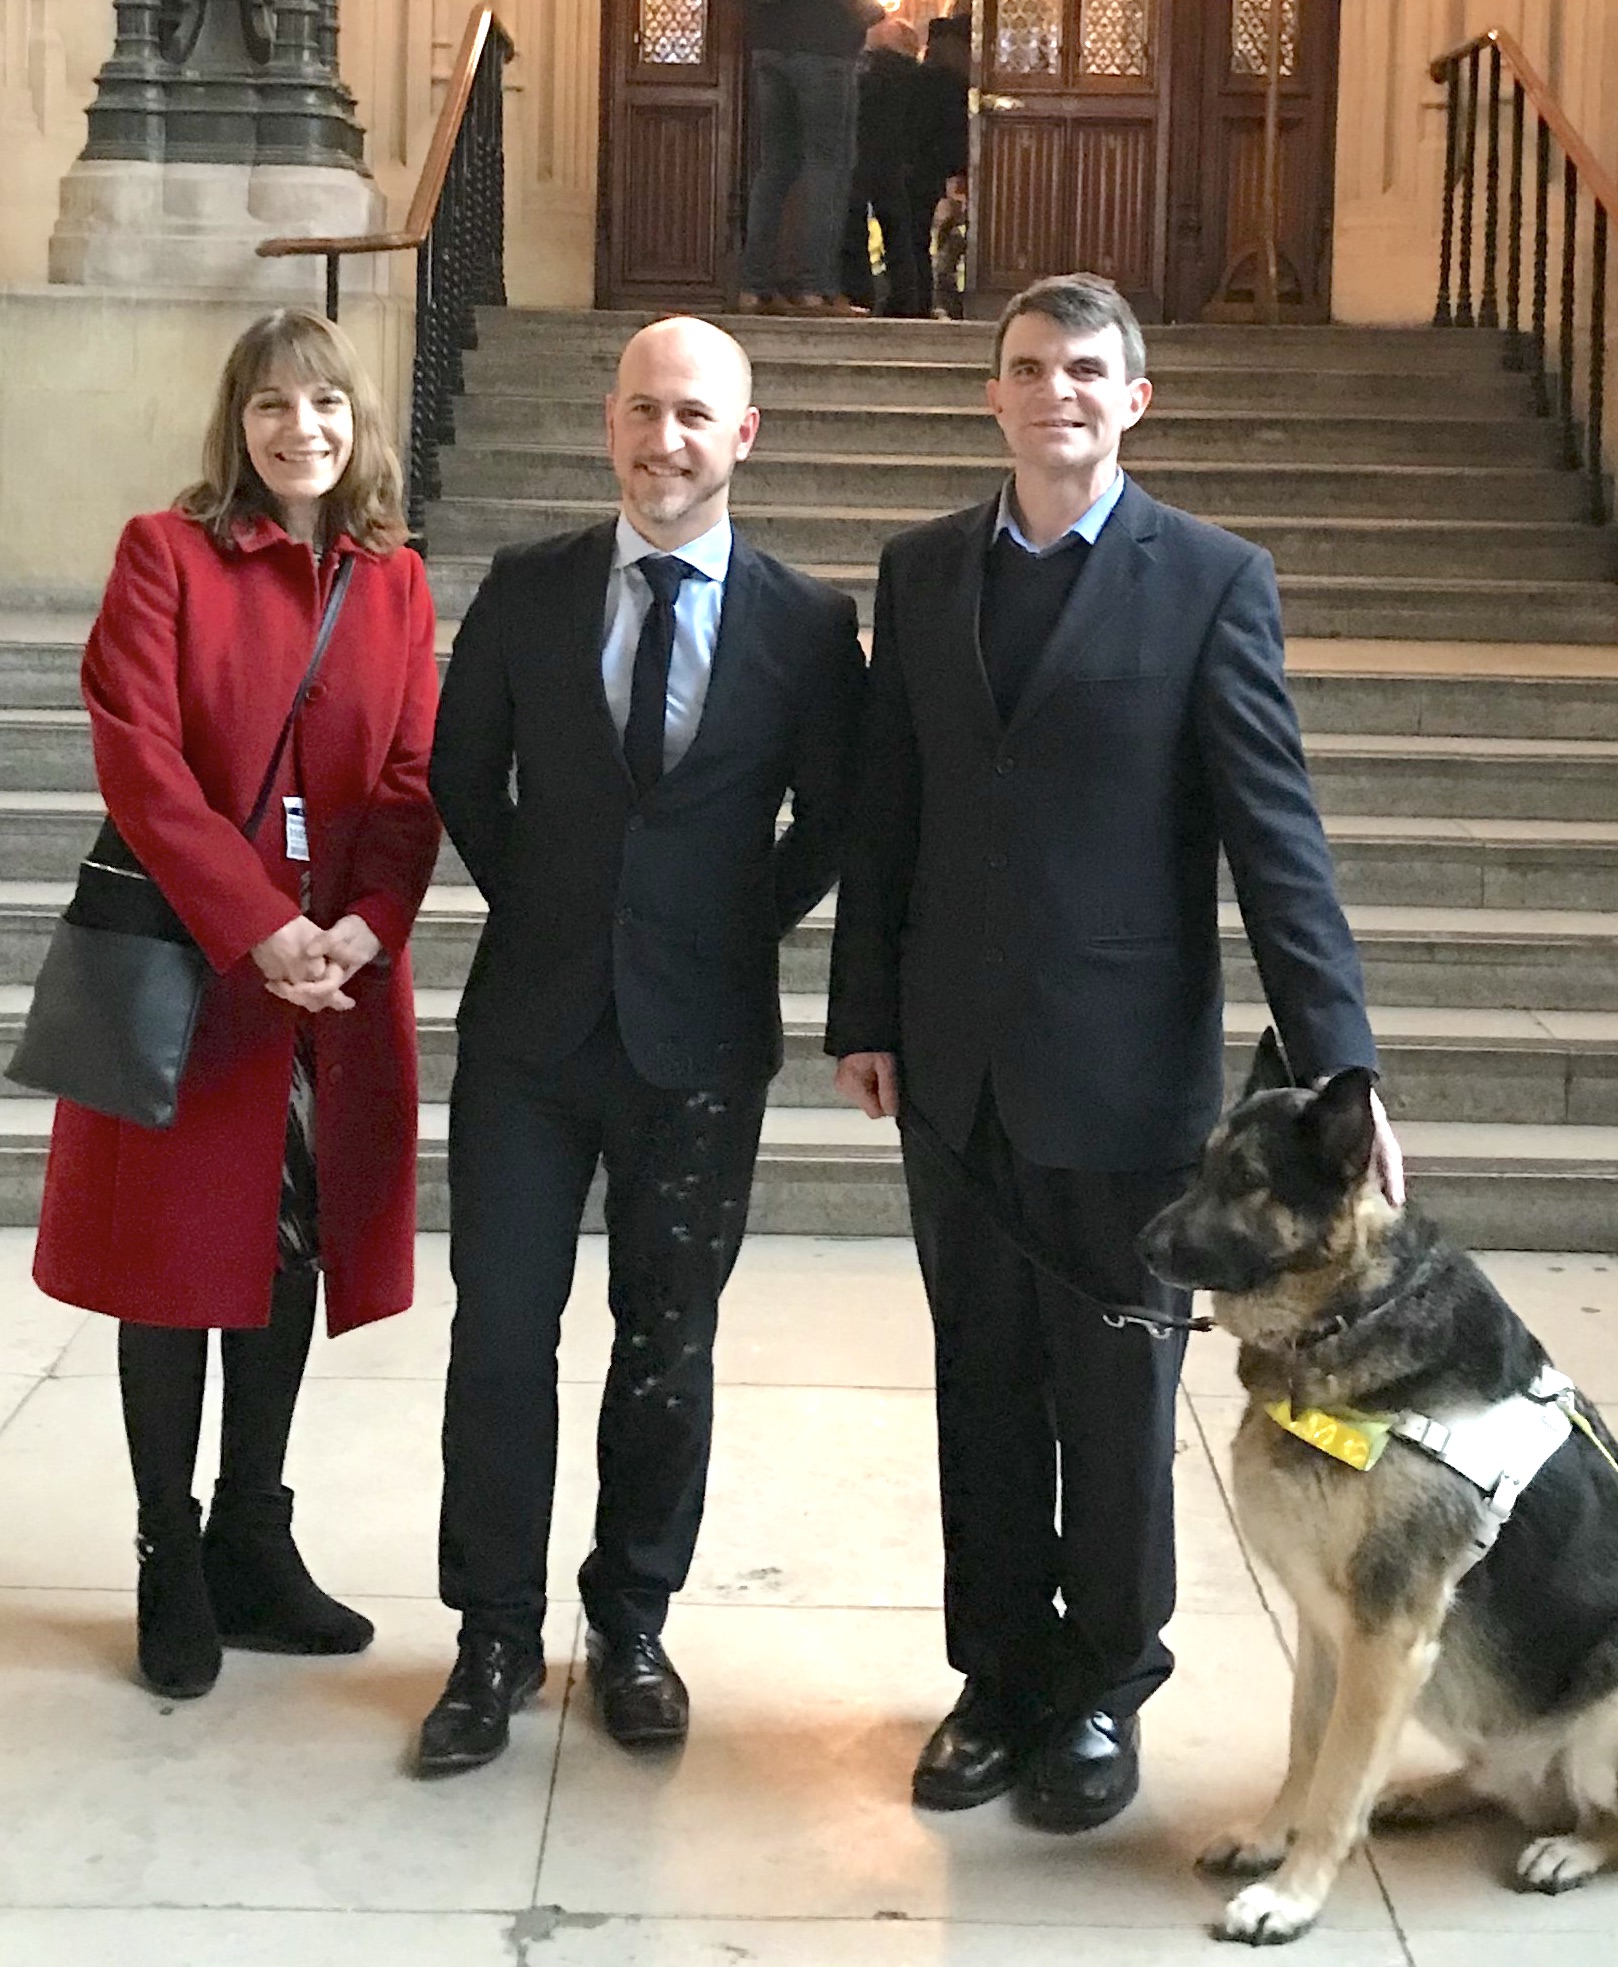 Robin Christopherson with Tracey Johnson and Hector Minto at the House of Commons Select Committee on 31 January 2018